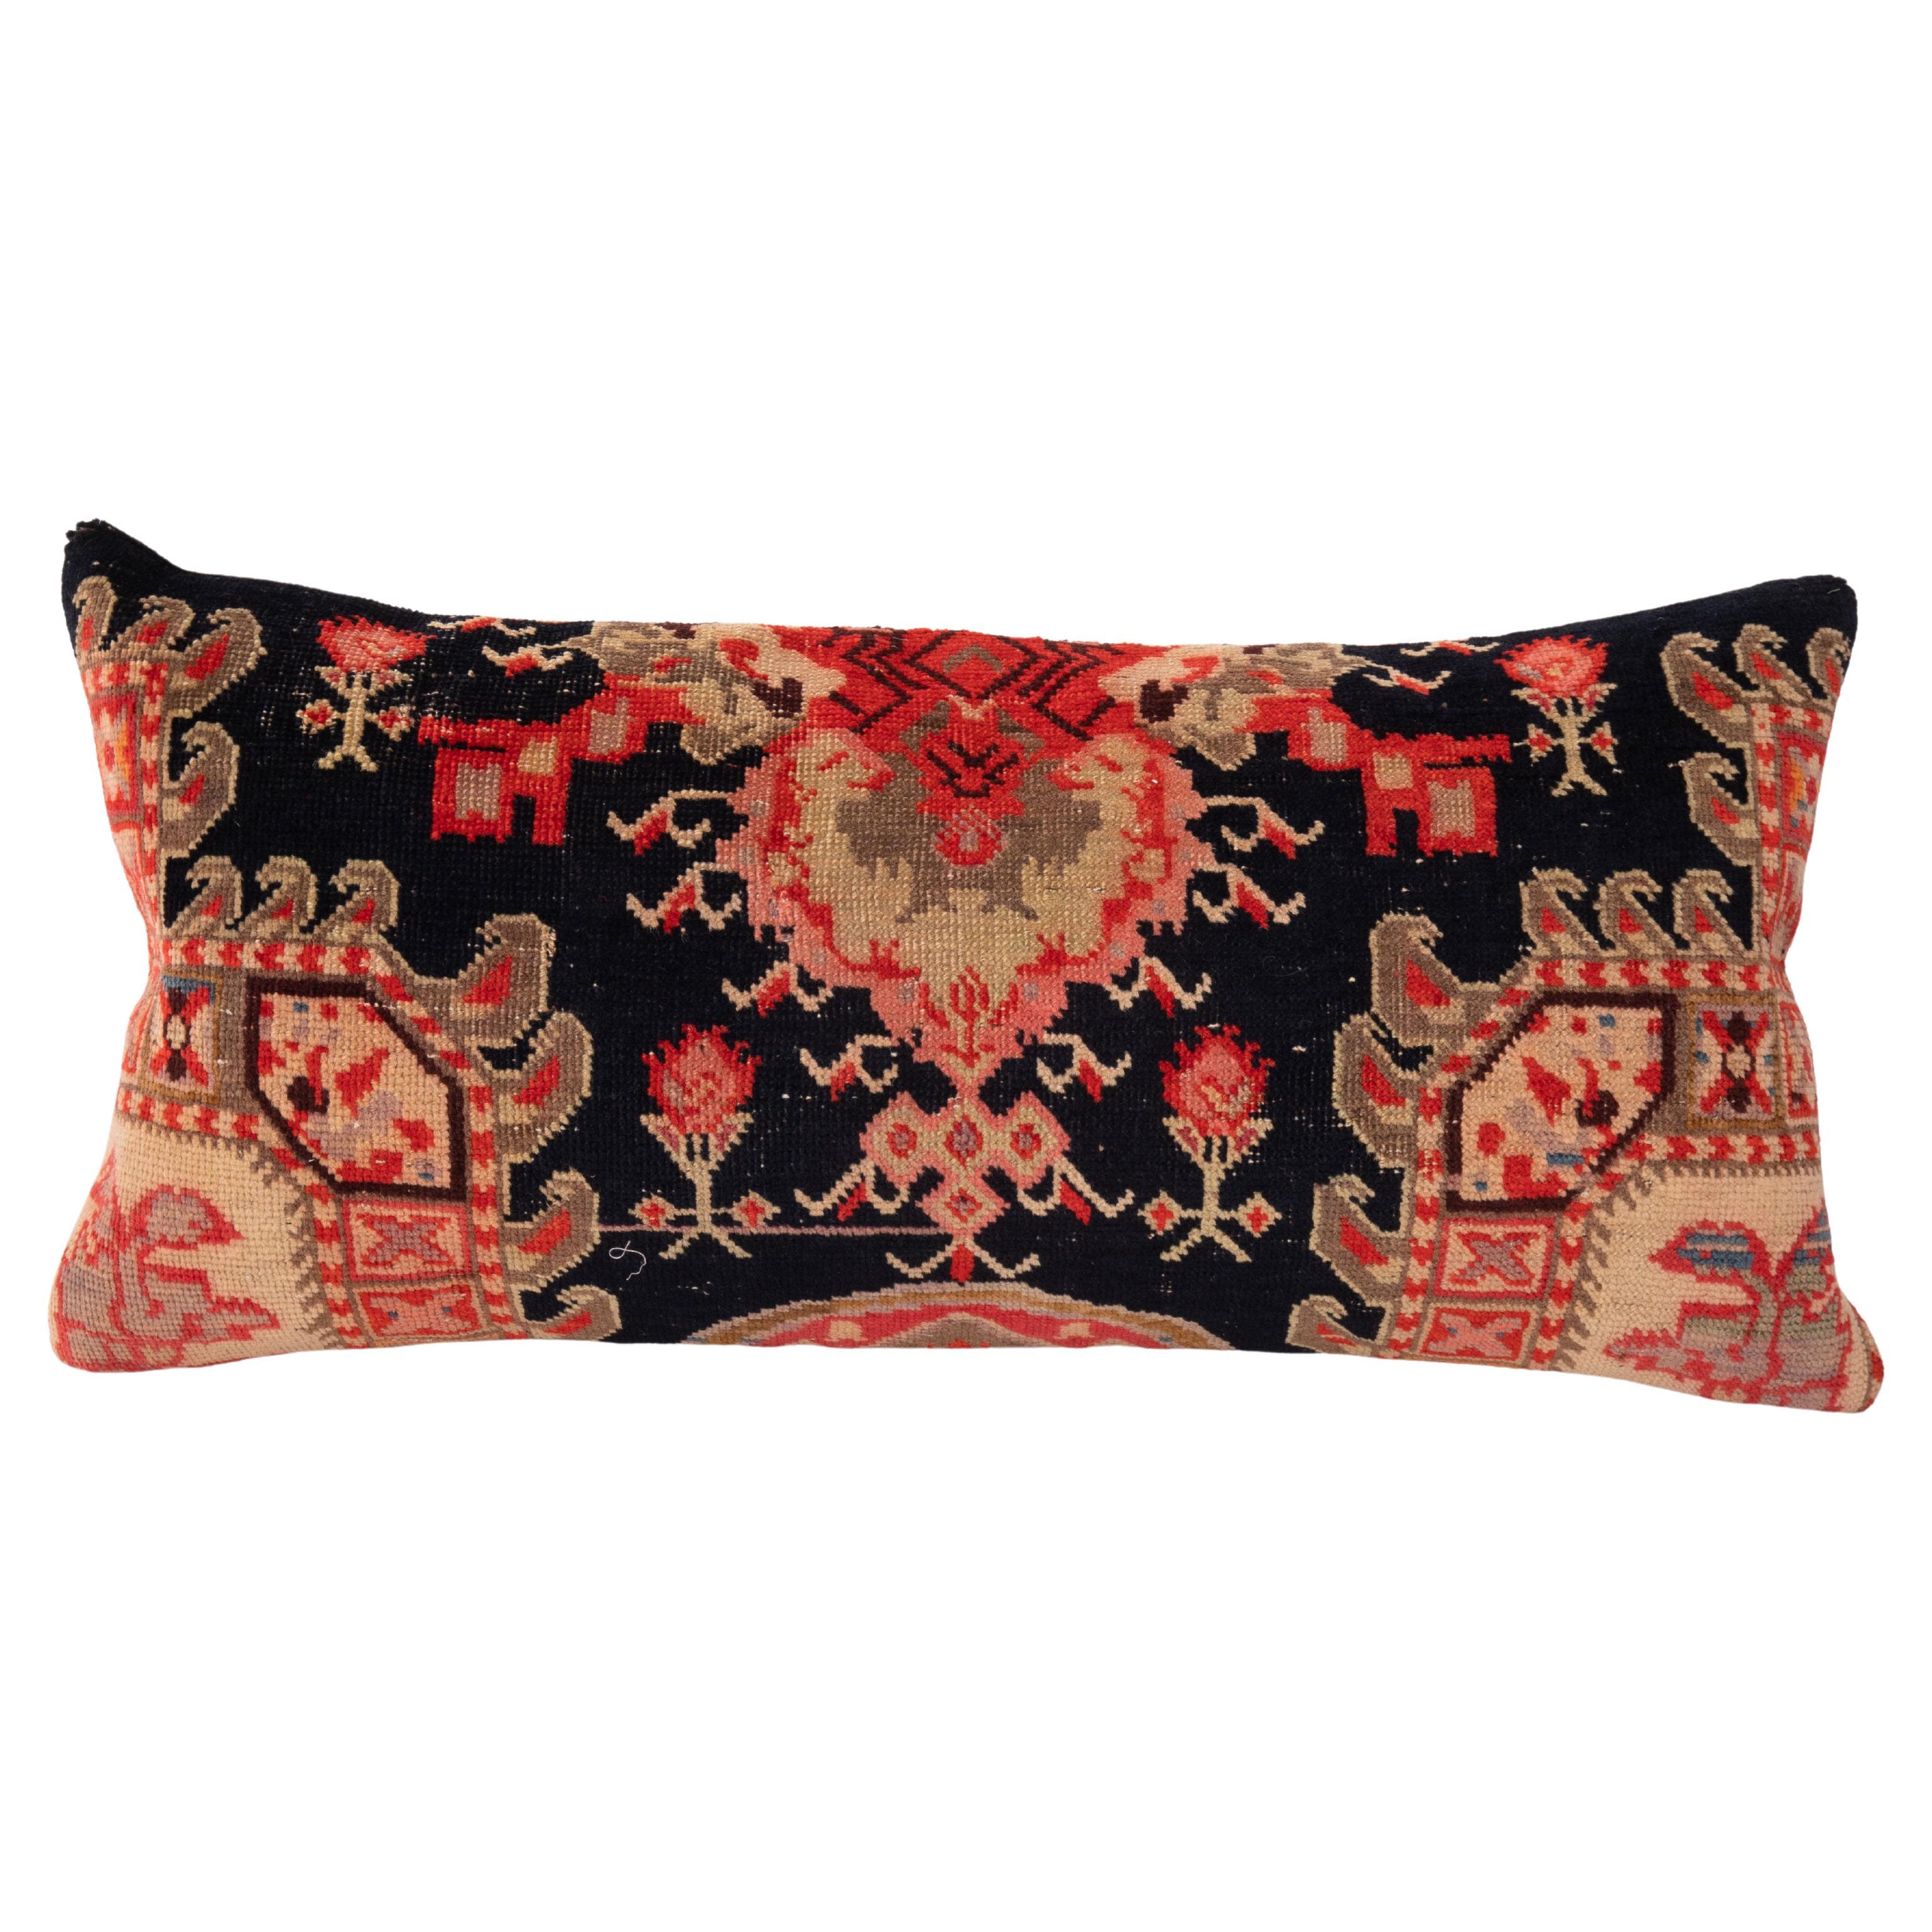 Pillow Cover Made from an Antique Caucasian Karabagkh Rug Fragment